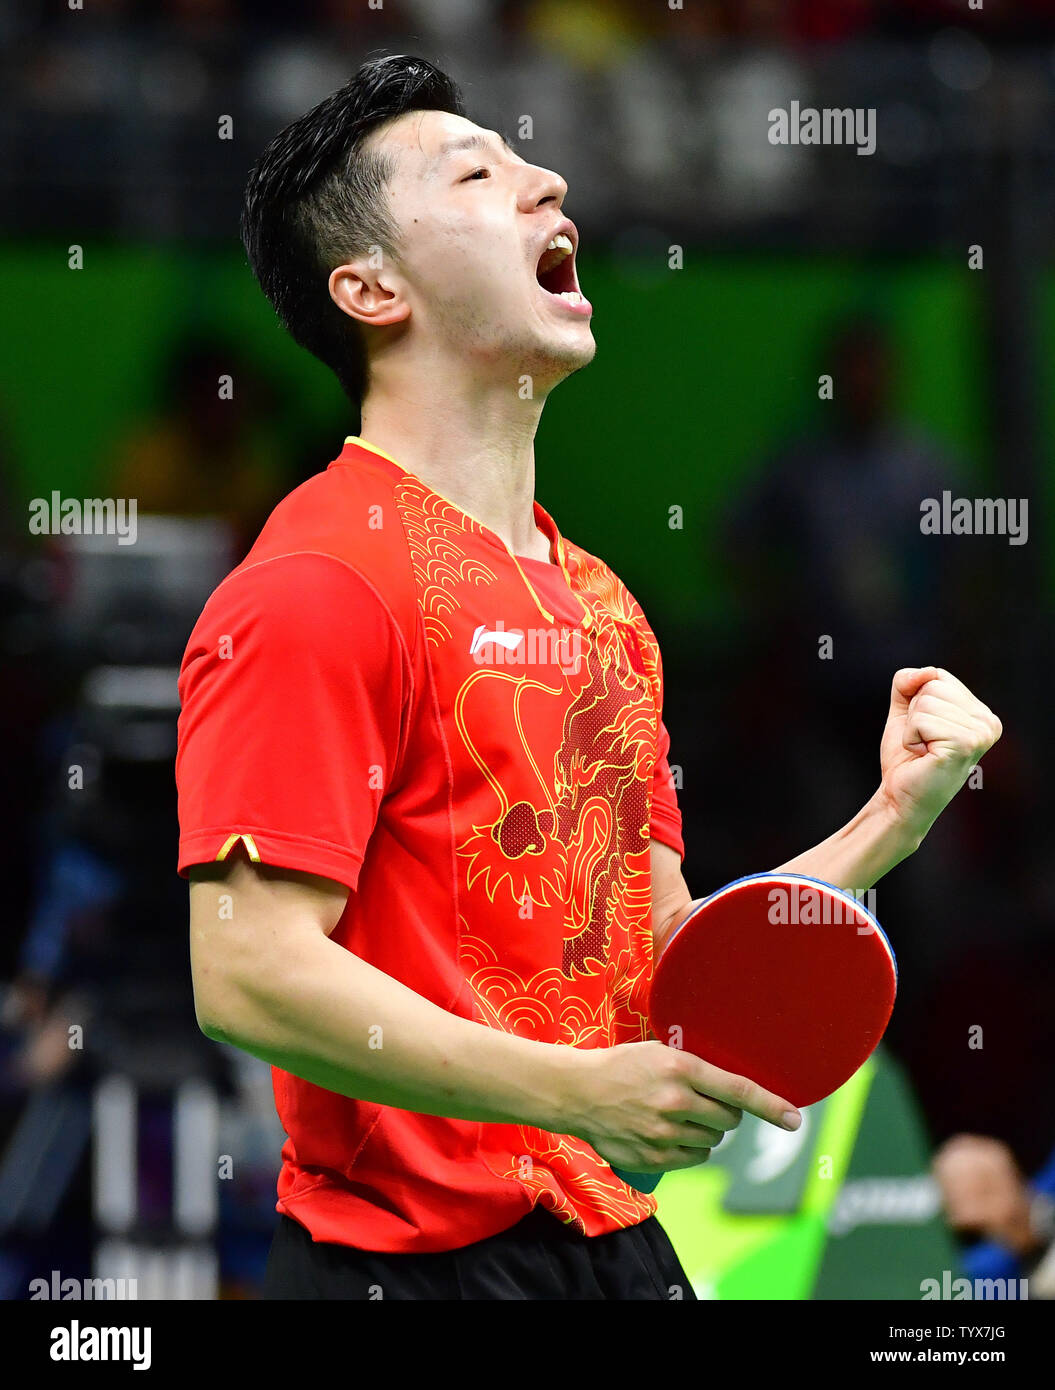 China's Ma Long celebrates in the final moments of his gold medal match against China's Zhang Jike in the Men's Singles Table Tennis final round 2016 Rio Summer Olympics in Rio de Janeiro, Brazil, August 11, 2016. Long went on to win gold for his second straight Olympic champion title. Photo by Kevin Dietsch/UPI Stock Photo